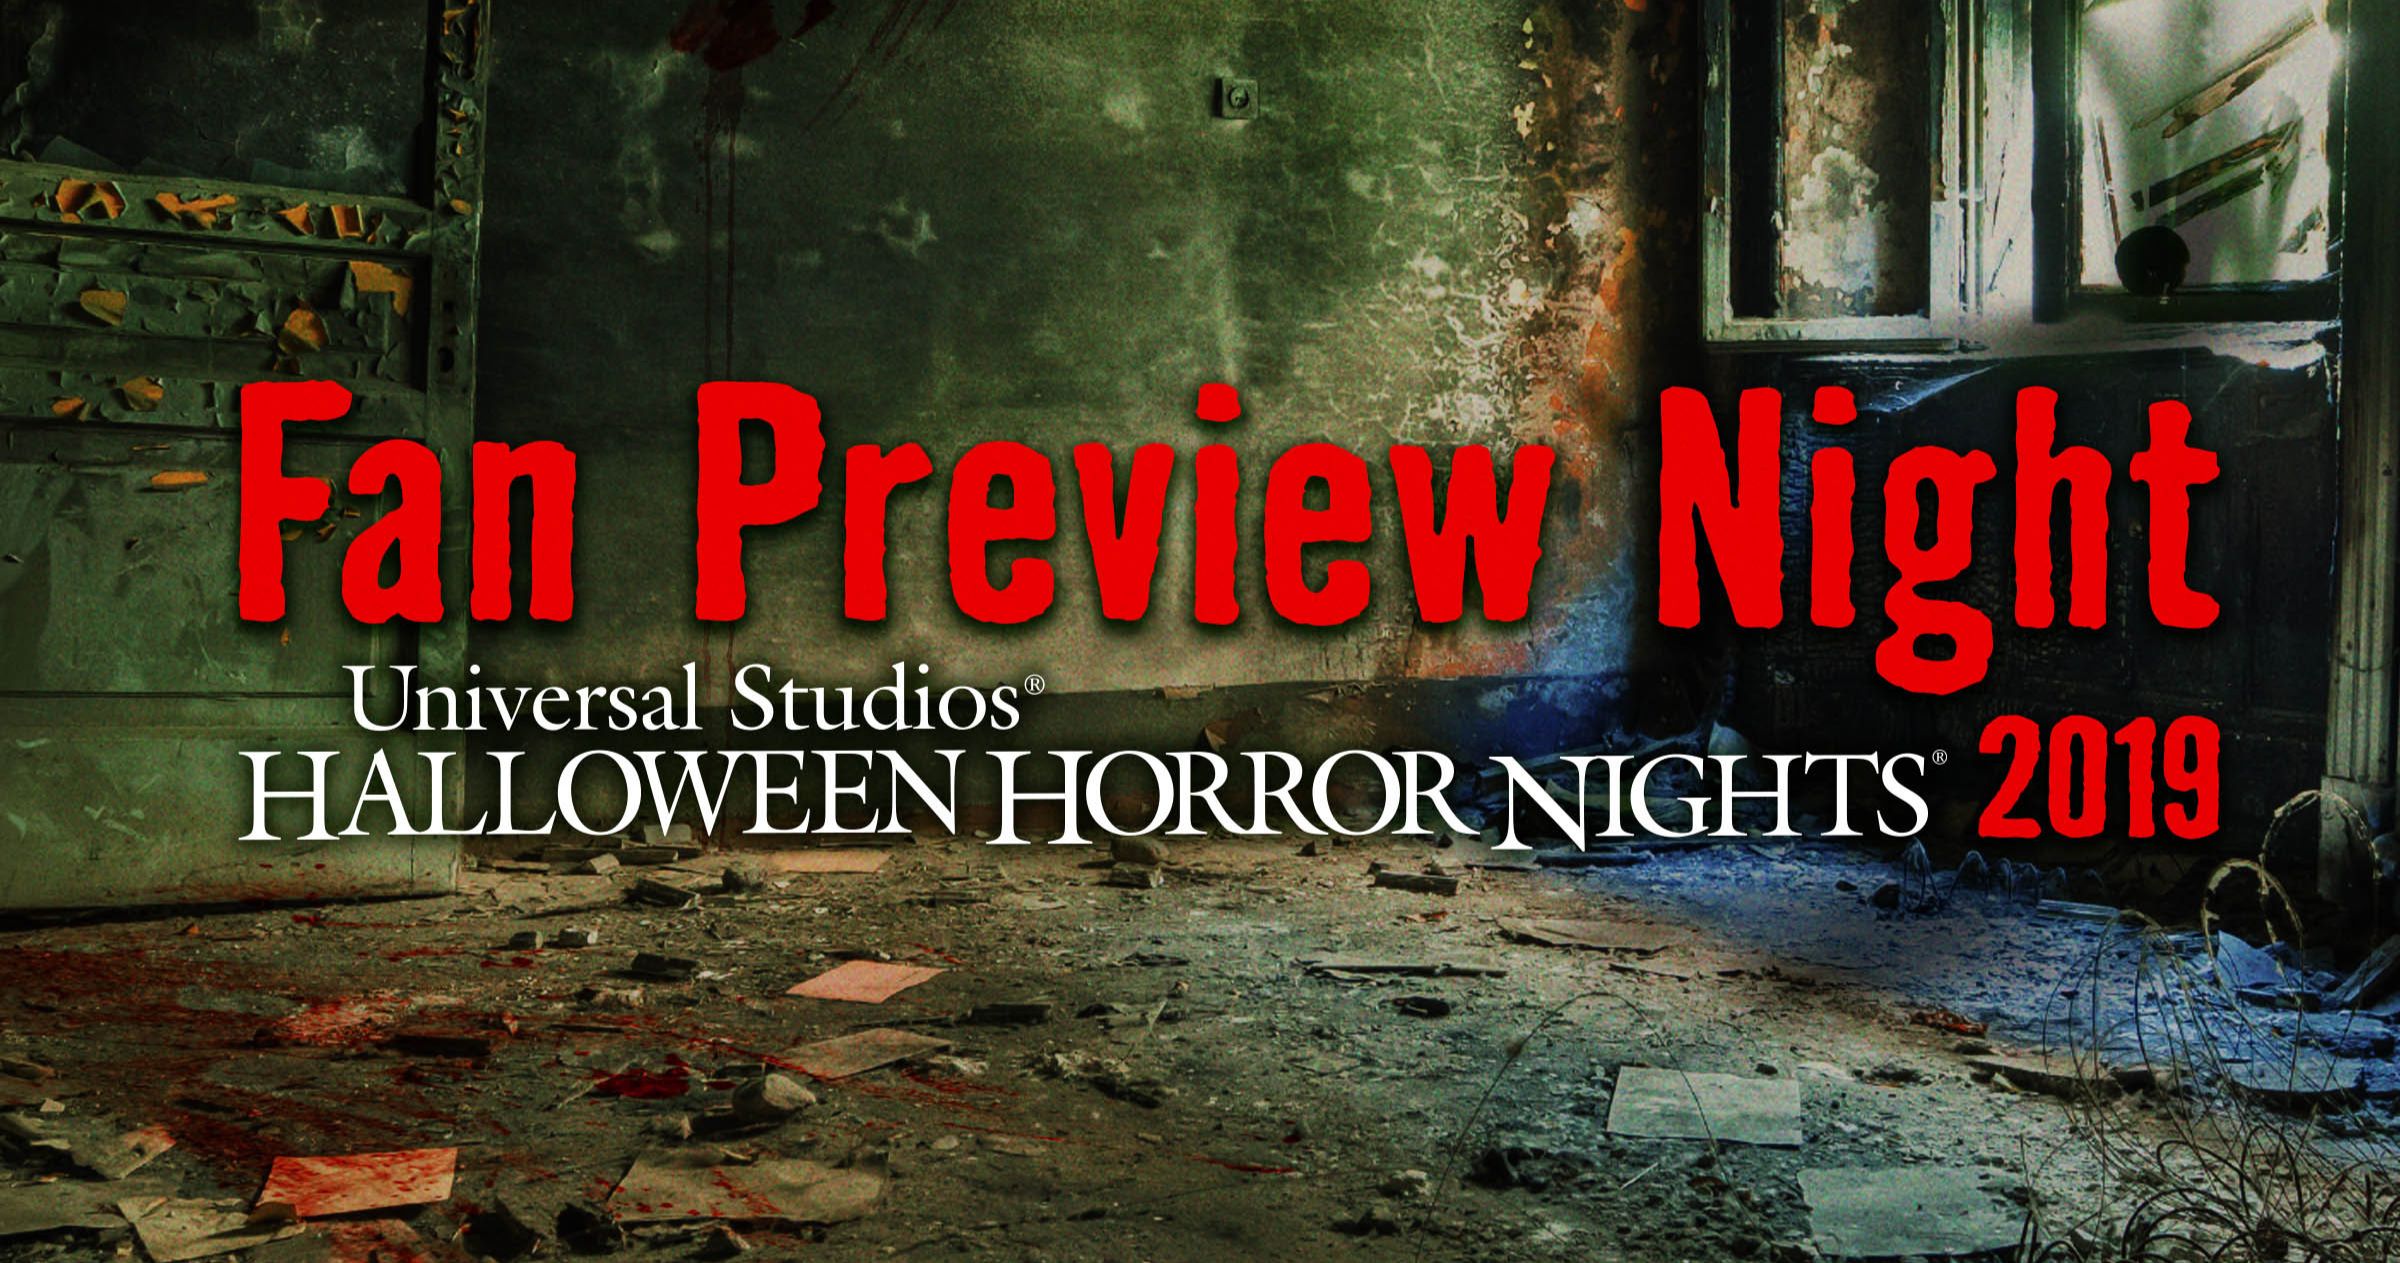 Halloween Horror Nights Hollywood Gives Fans a Sneak Preview on